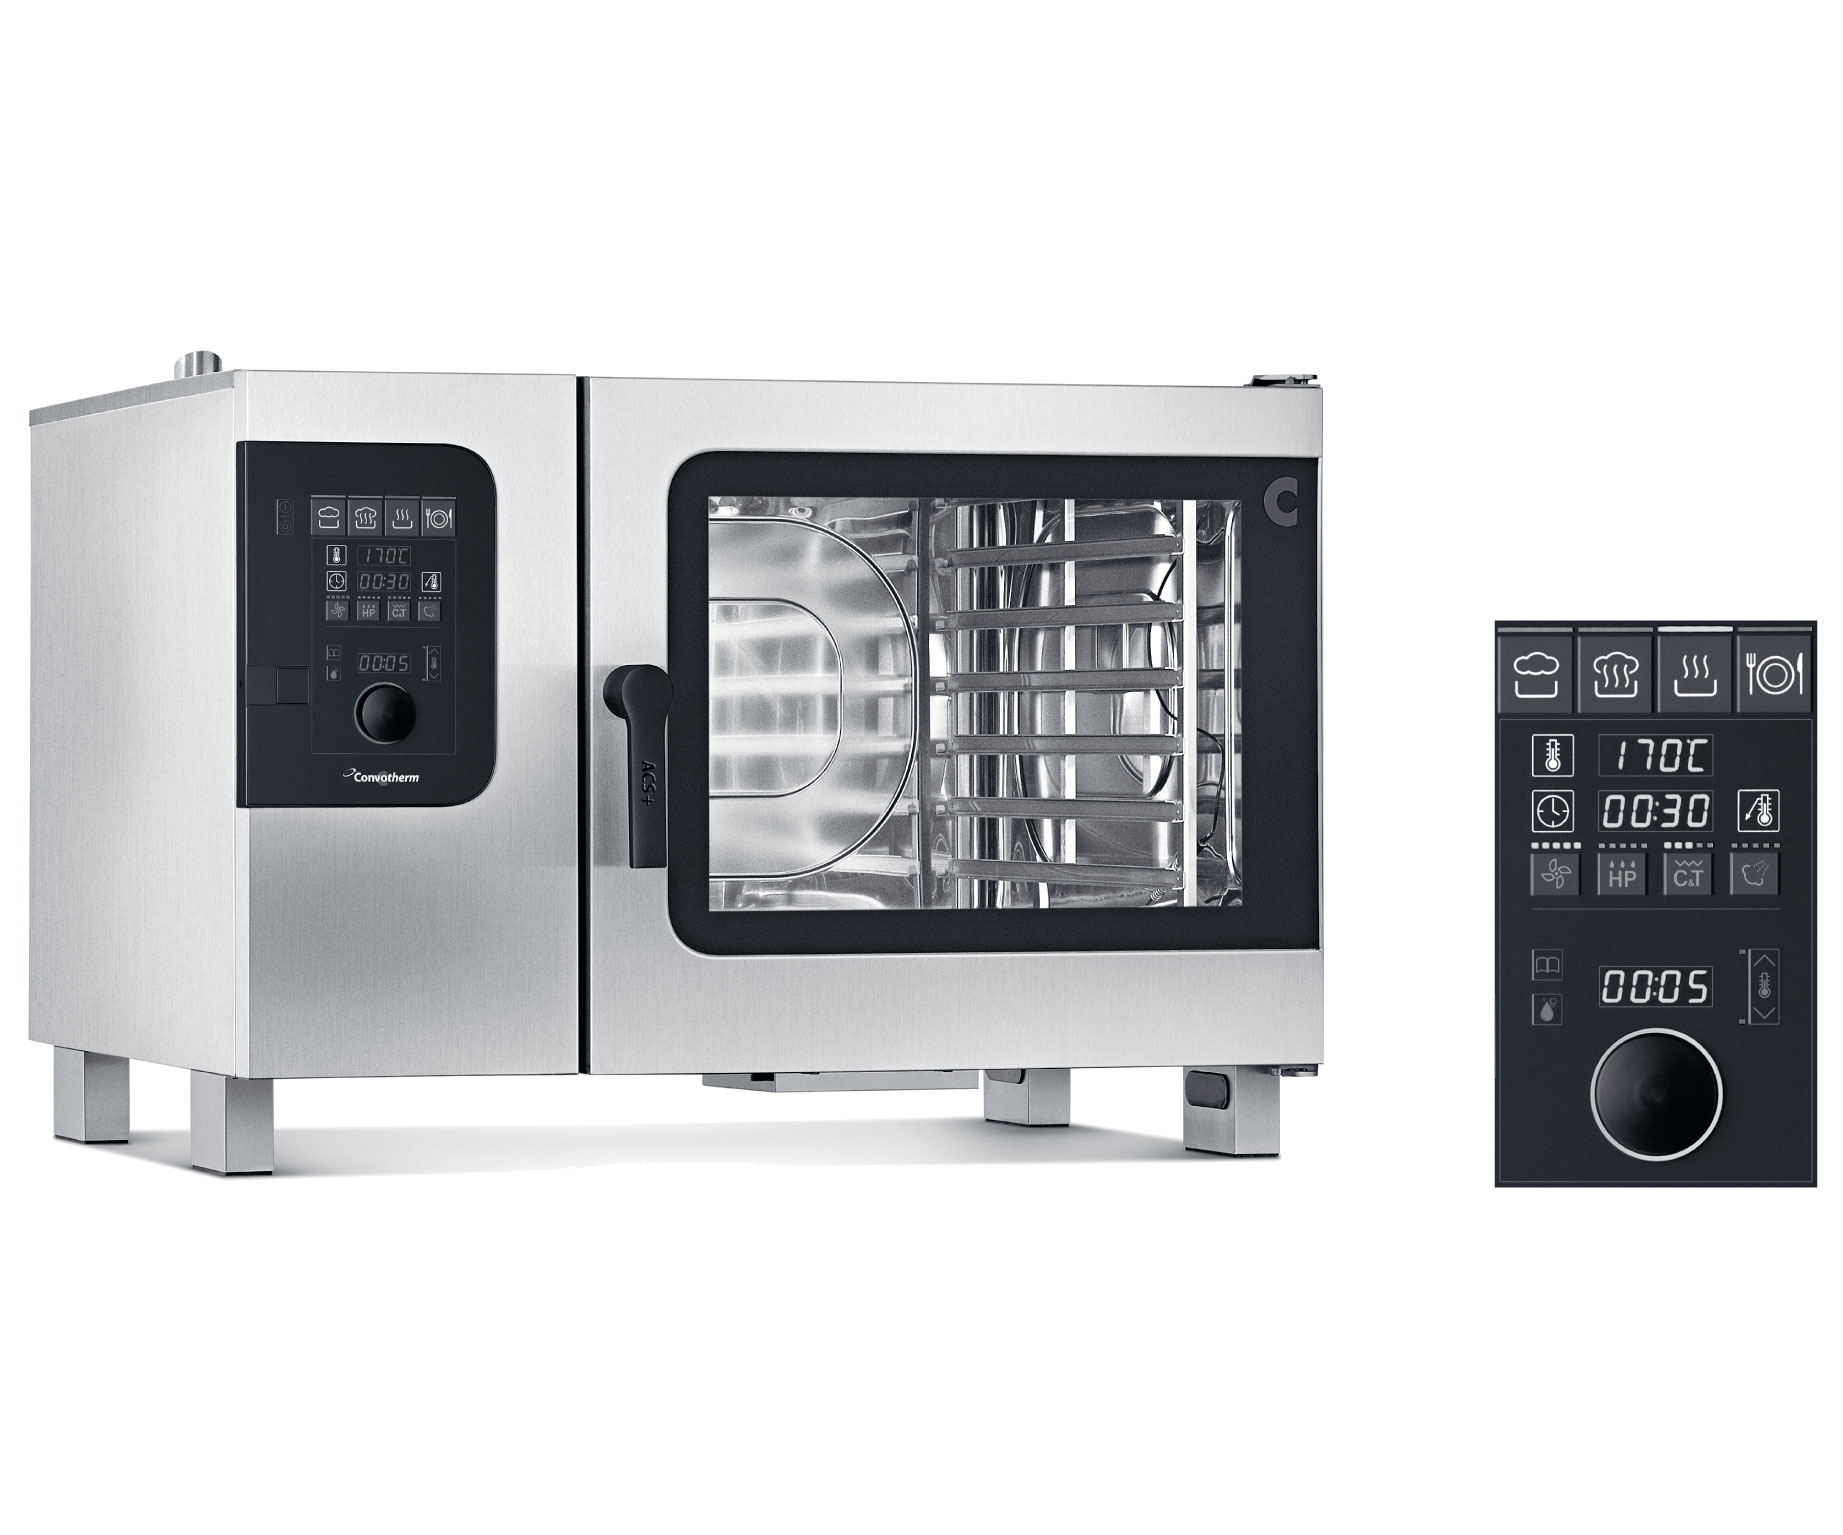 Convotherm C4 ED 6.20EB Full-Size Electric Combi Oven w/ Programmable Controls, Steam Generator